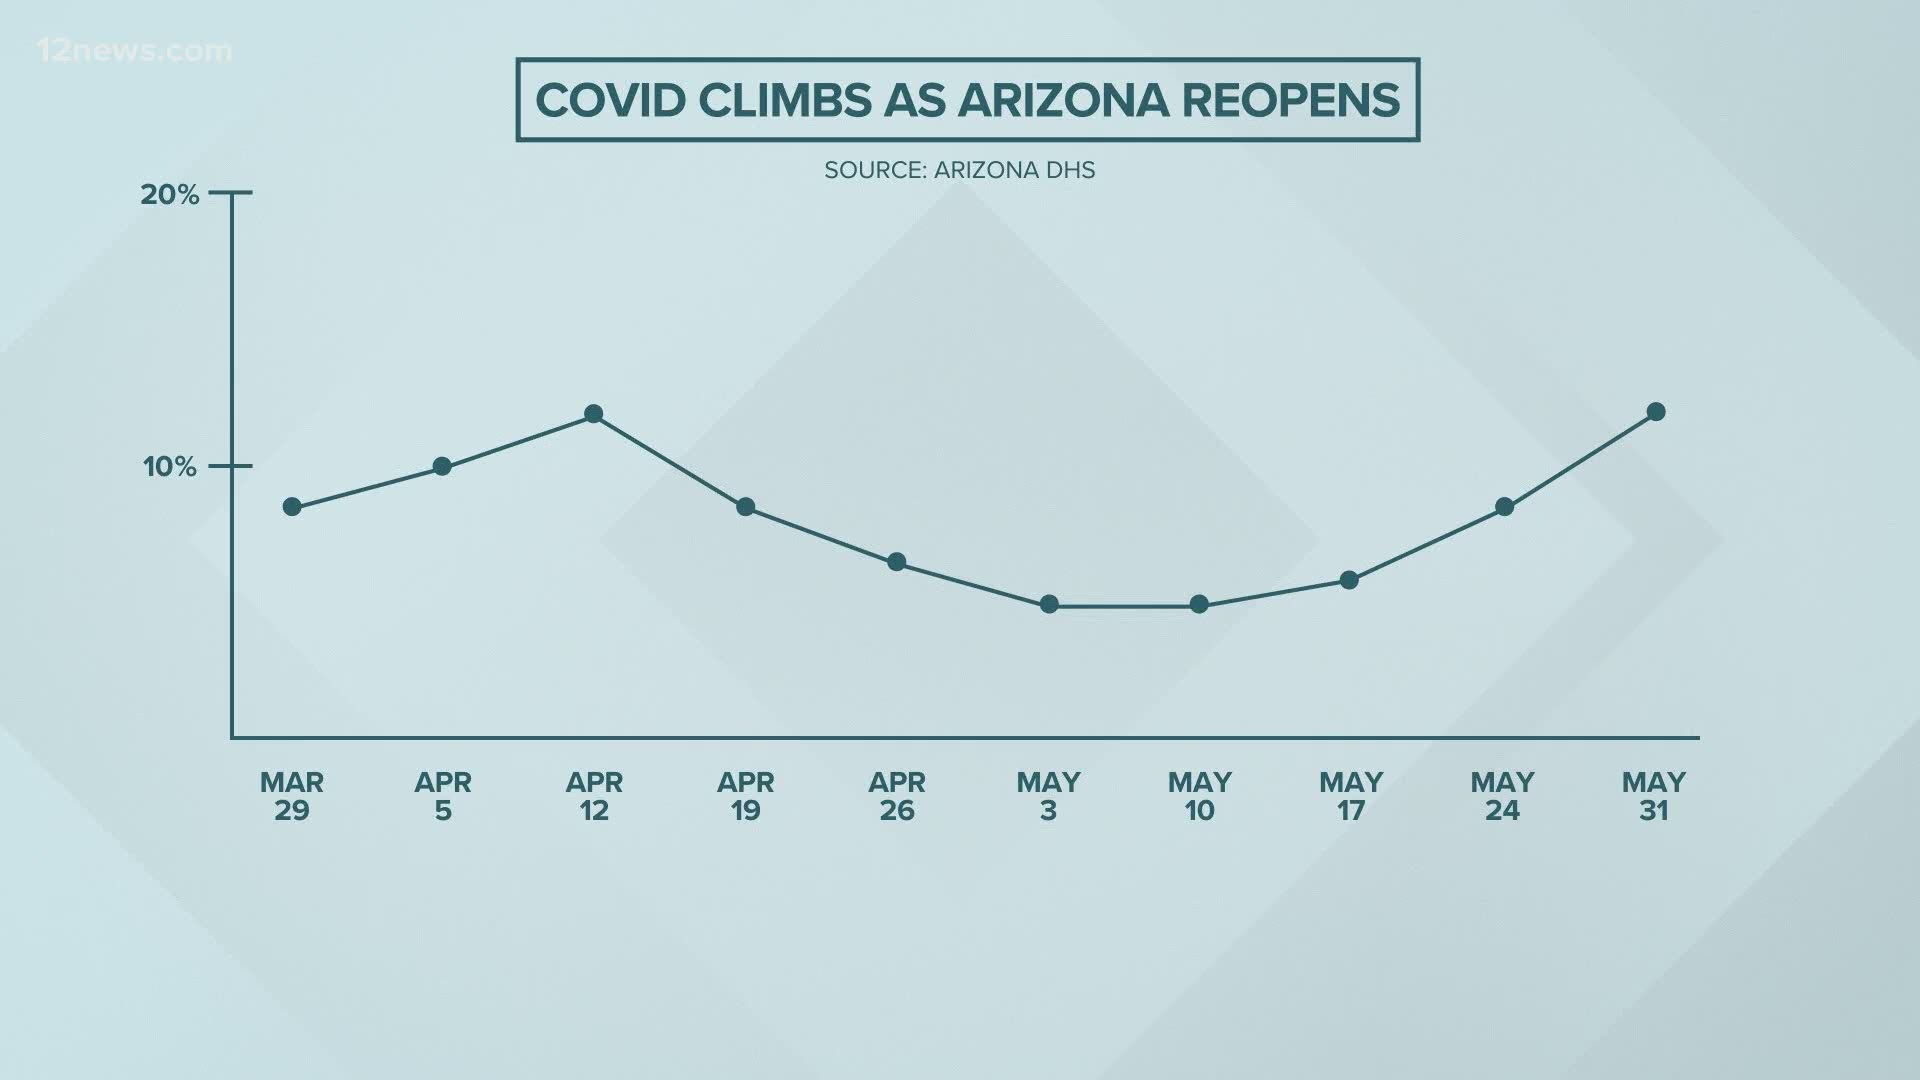 Arizona now has one of the fastest-growing coronavirus case loads in the country. The latest data shows the state is falling short of White House guidelines.